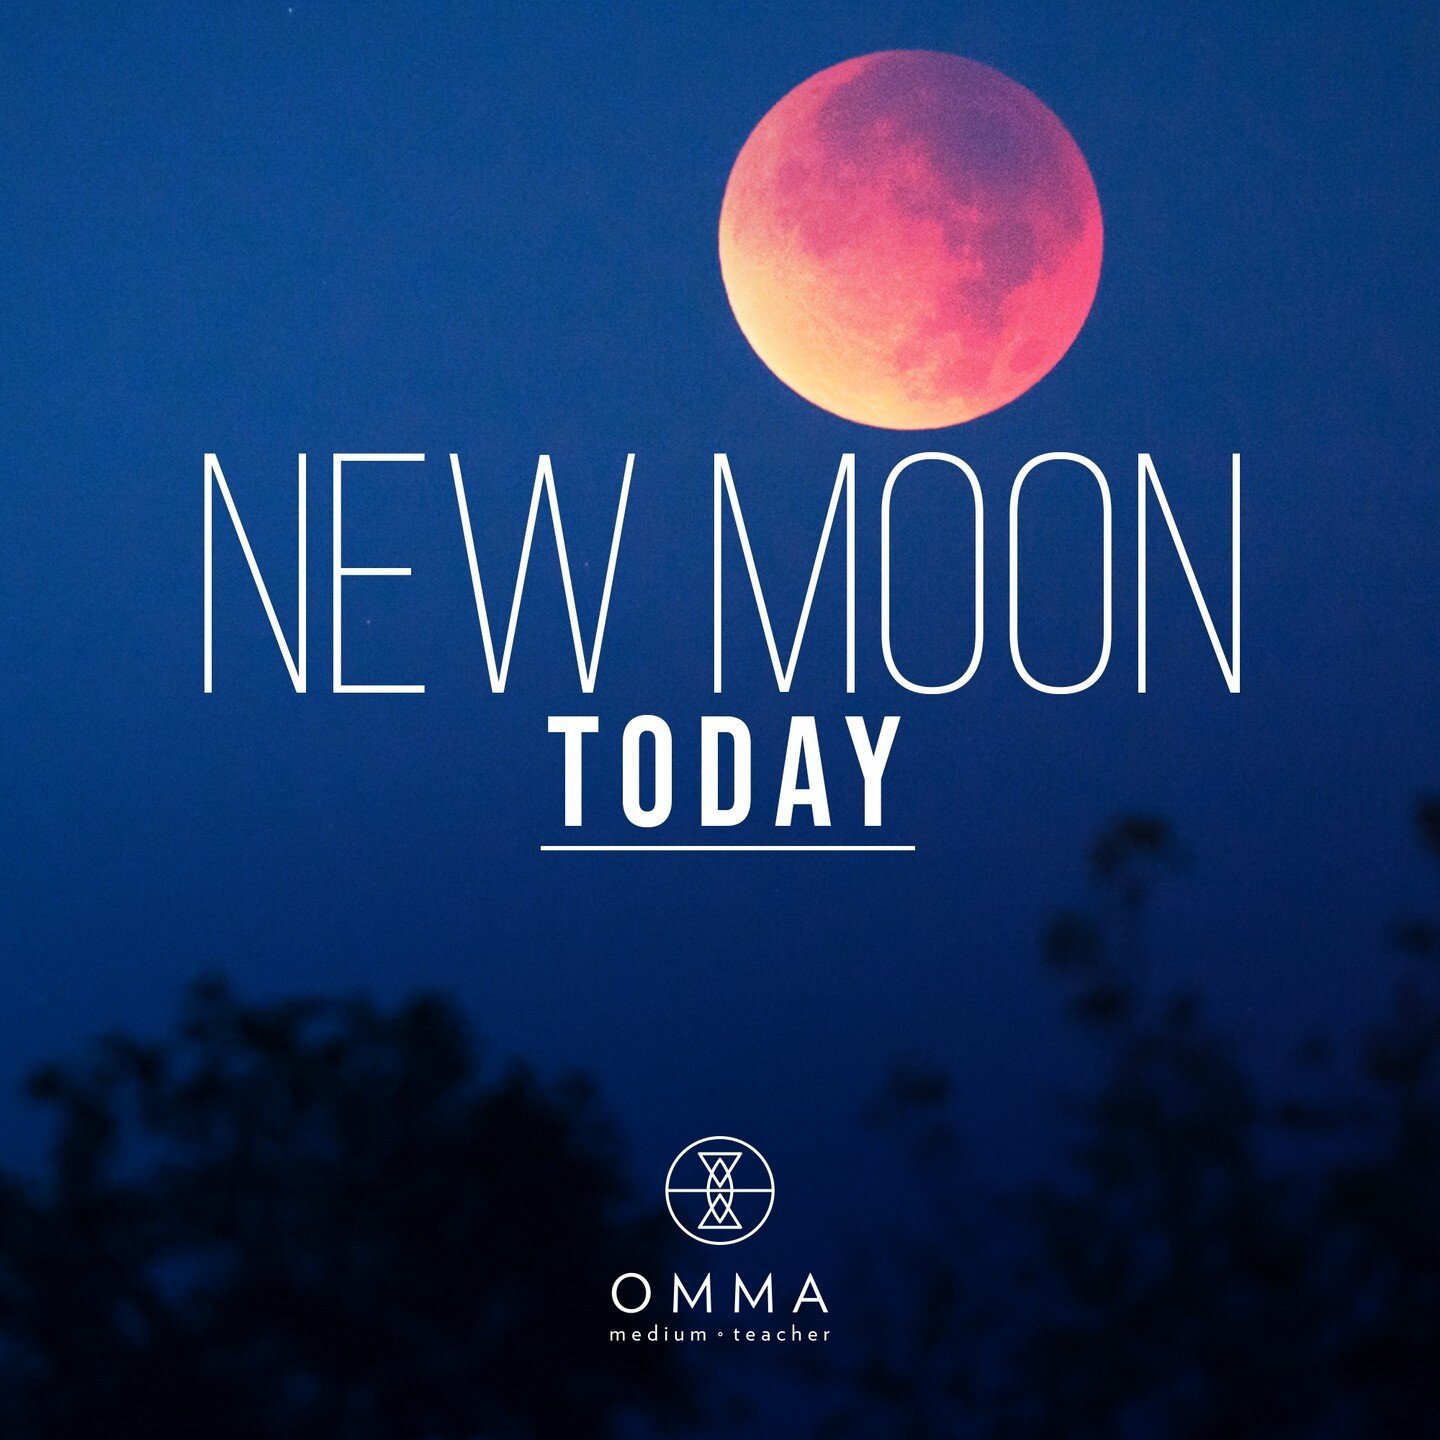 Tonight marks the New Moon 🌑 Build an altar of new intentions as you begin this new phase. This is a time for new beginnings, a fresh start 🙌⁣
#enlightenment #theomma #psychic #medium #healer #psychicmedium #spiritualcoach #intuition #afterlife #aw